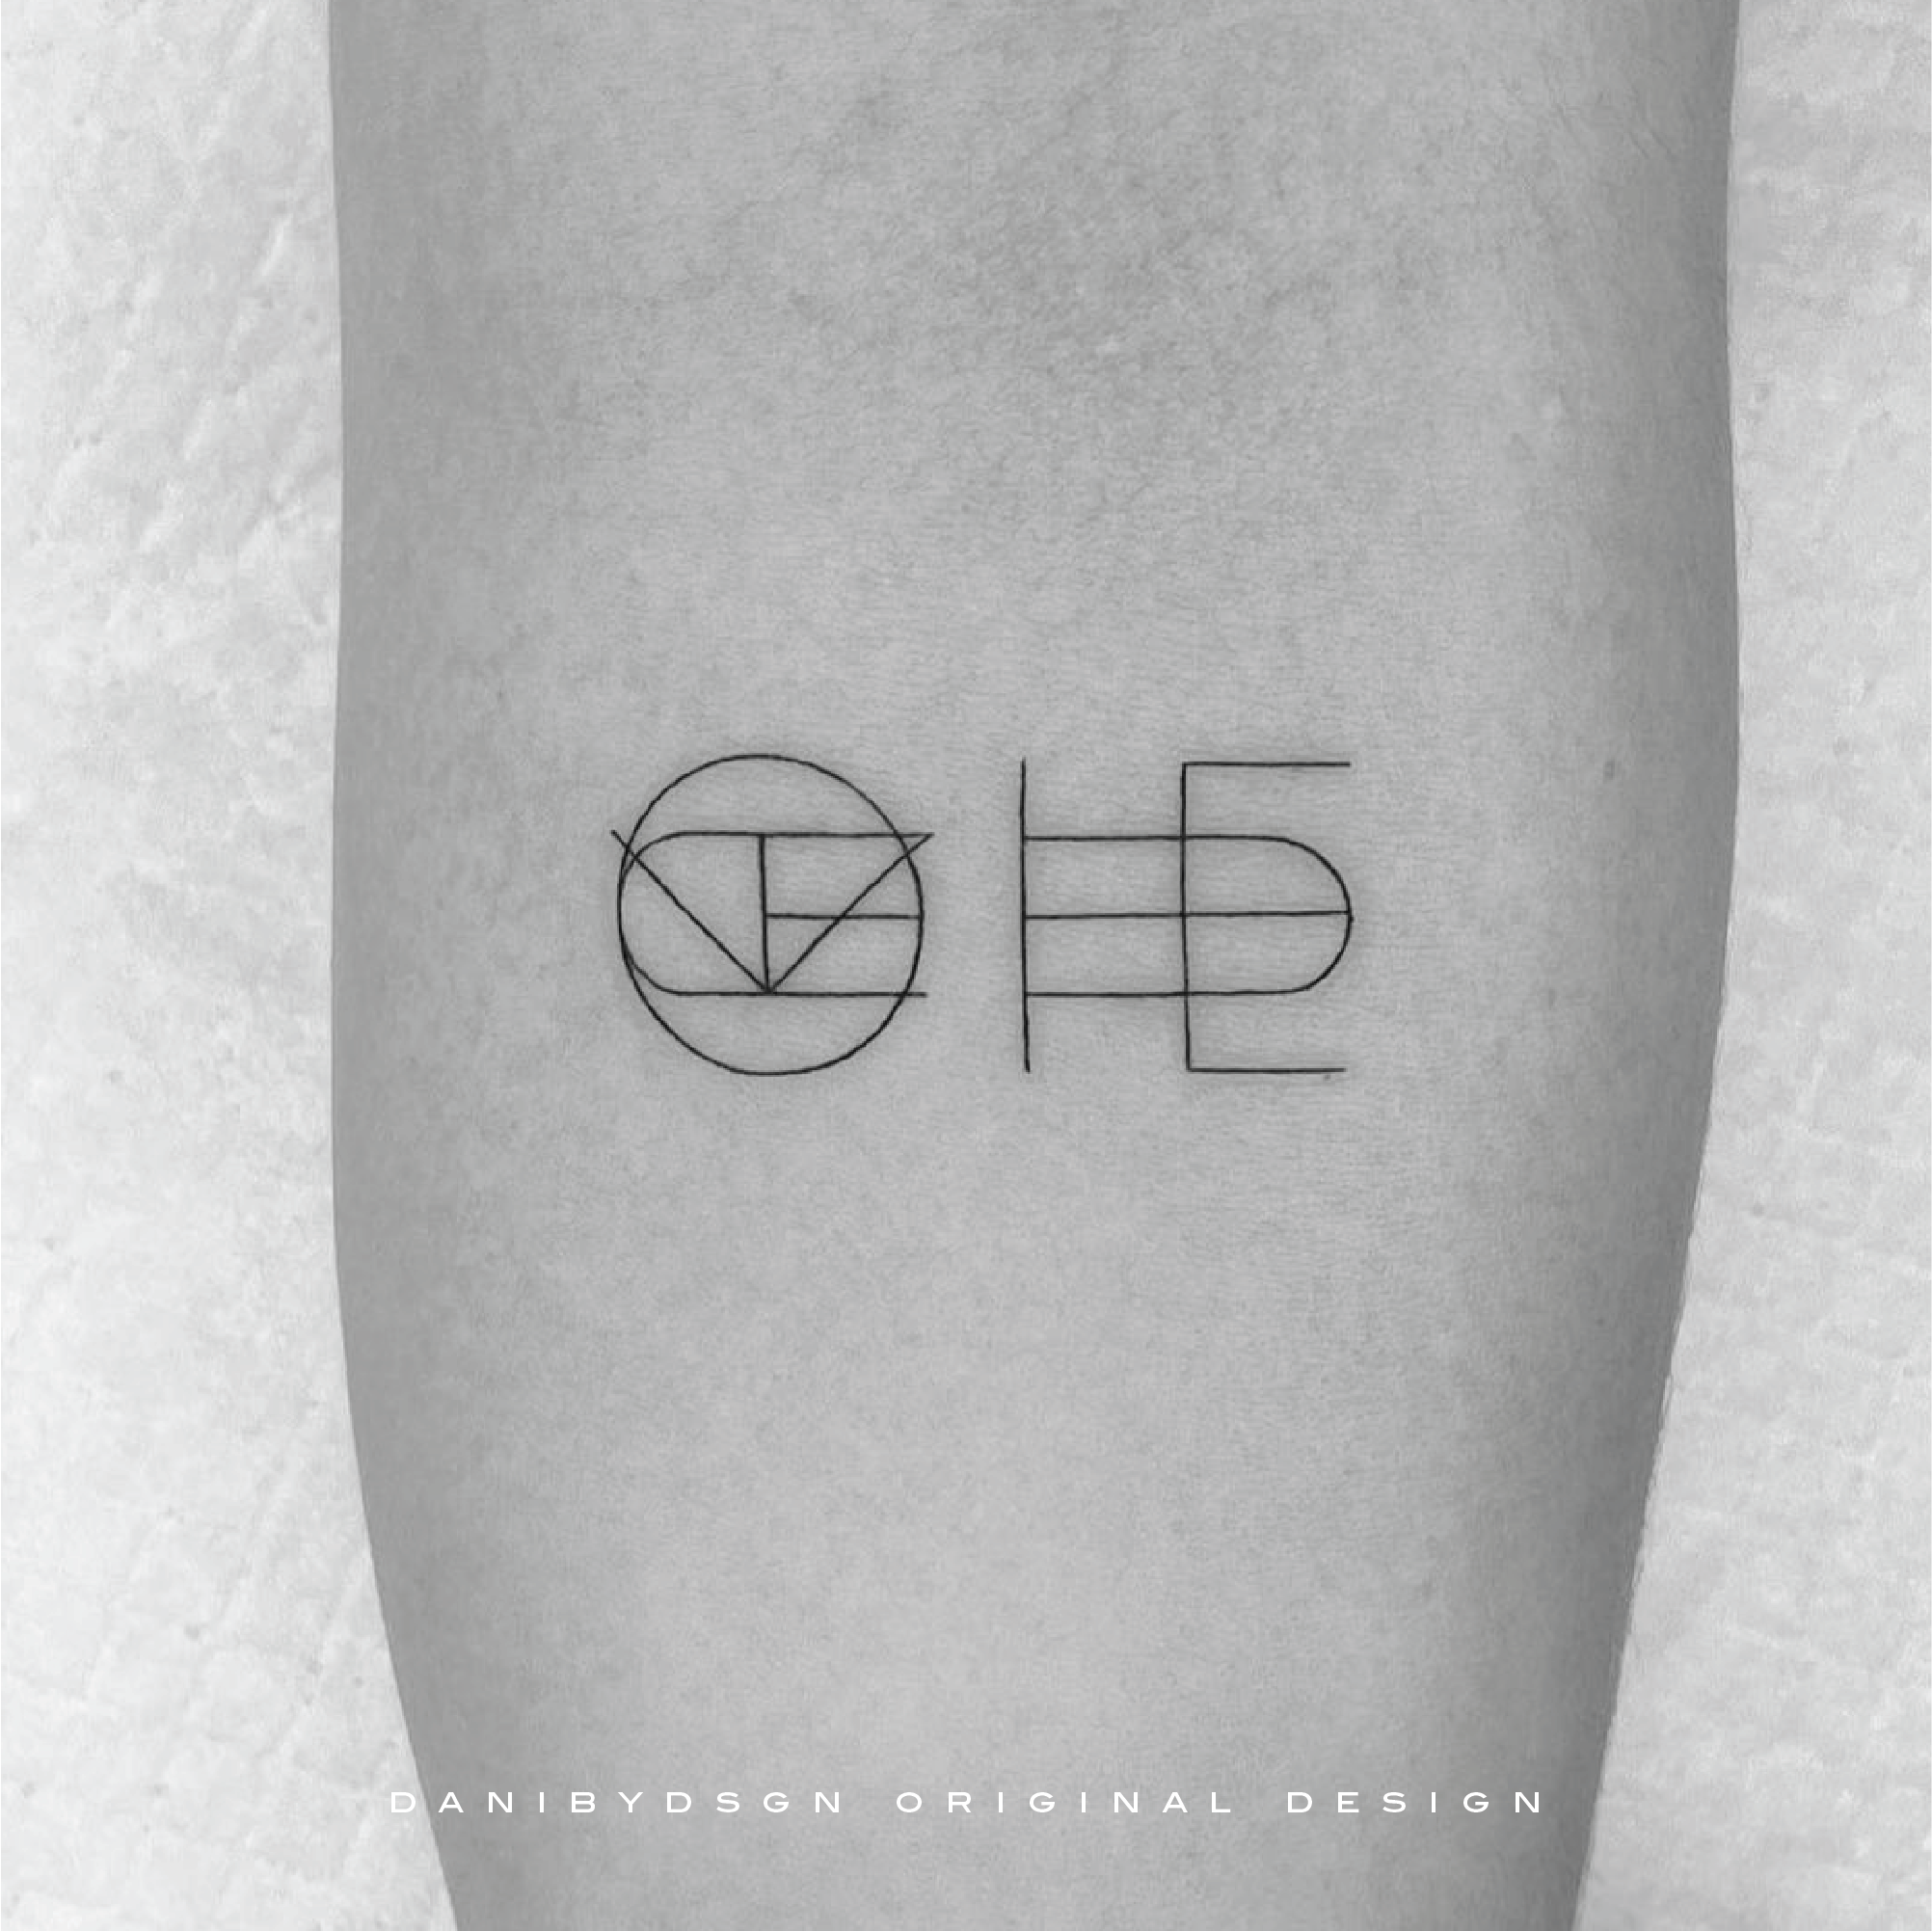 Modern logo design, tattoo design, featuring overlapping letters, 2 symbol design pictured